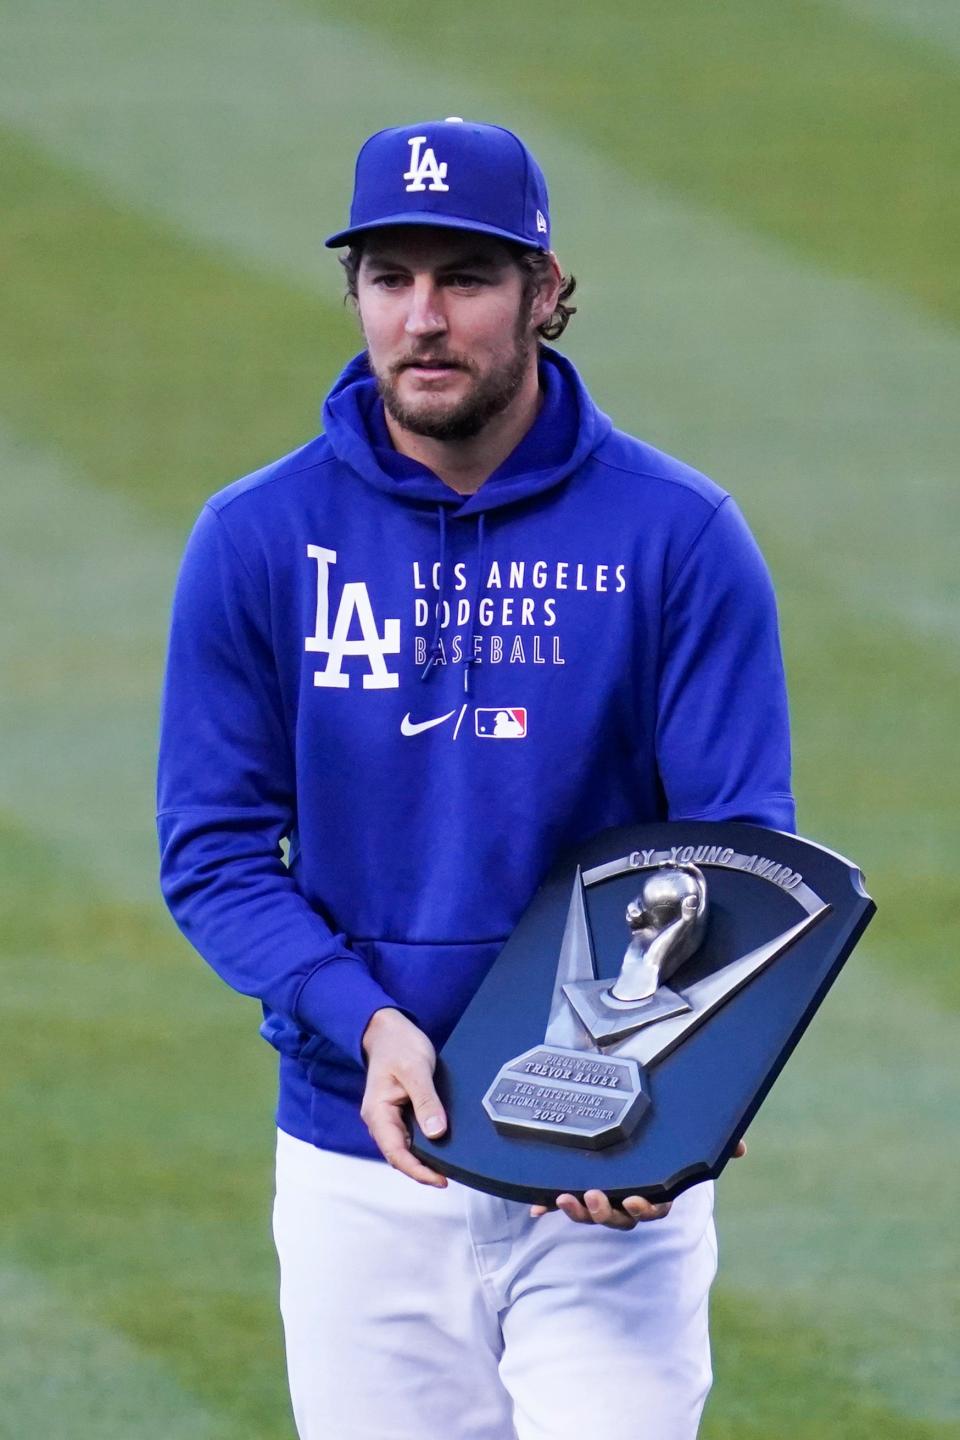 Los Angeles Dodgers pitcher Trevor Bauer holds the 2020 Cy Young Award before a baseball game between the Cincinnati Reds and the Los Angeles Dodgers Tuesday, April 27, 2021, in Los Angeles. He was presented with the award before the game.